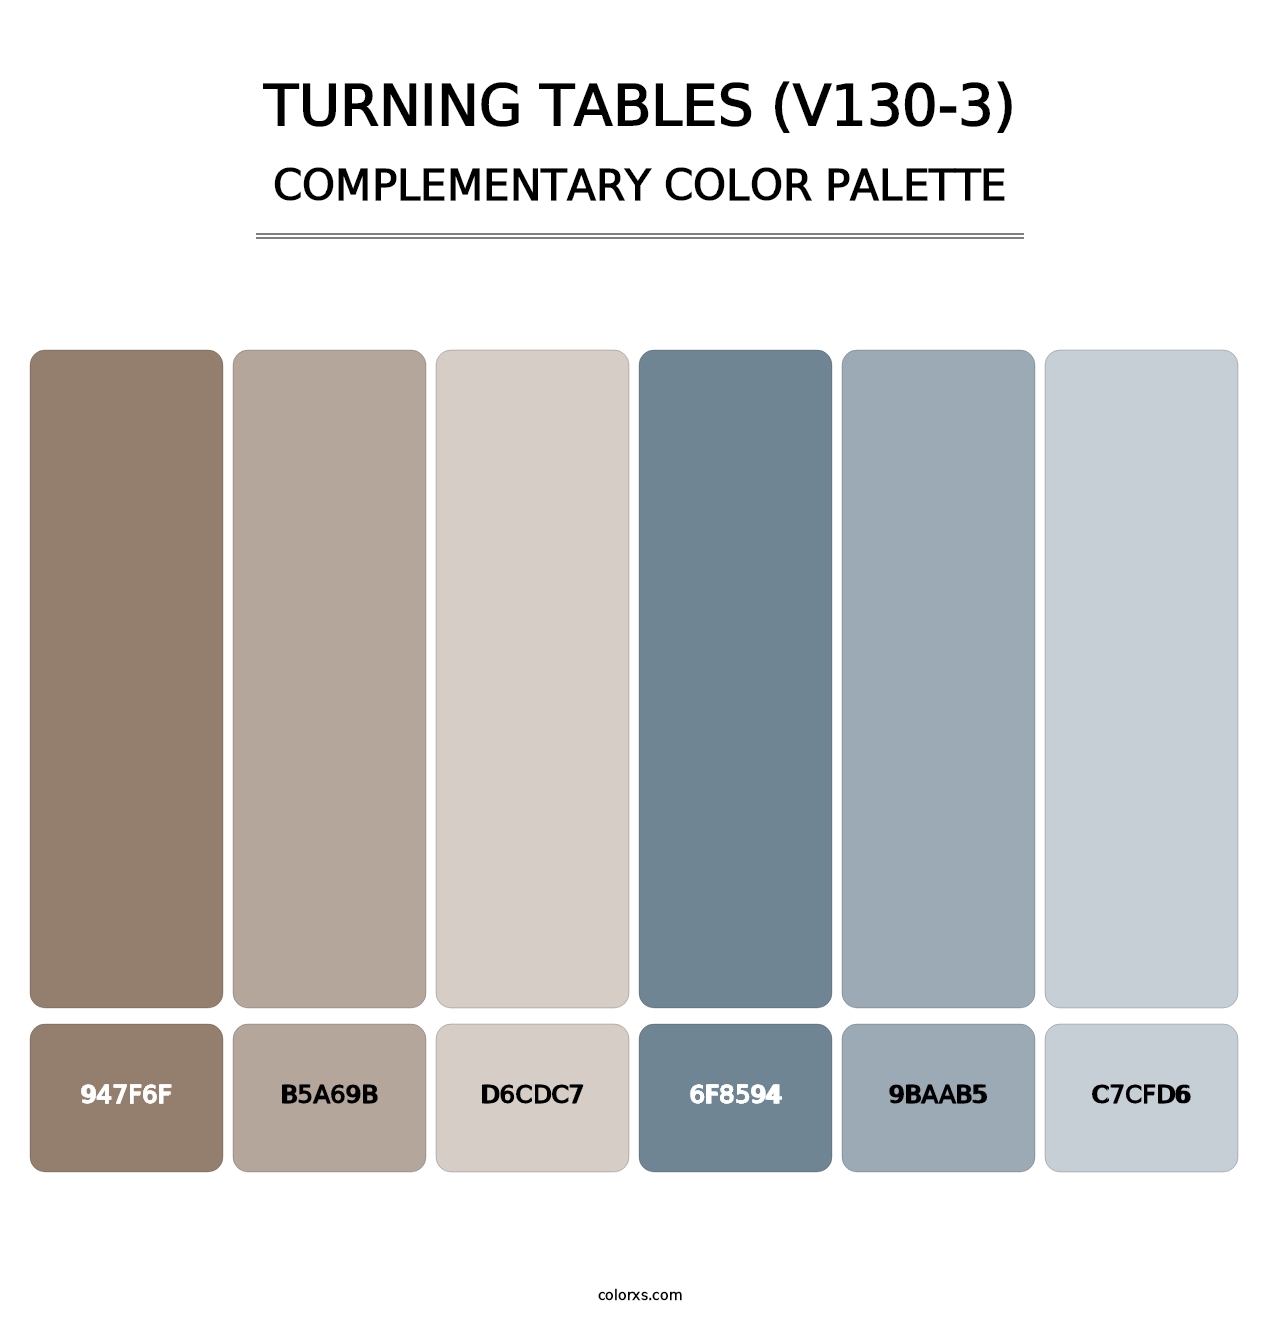 Turning Tables (V130-3) - Complementary Color Palette